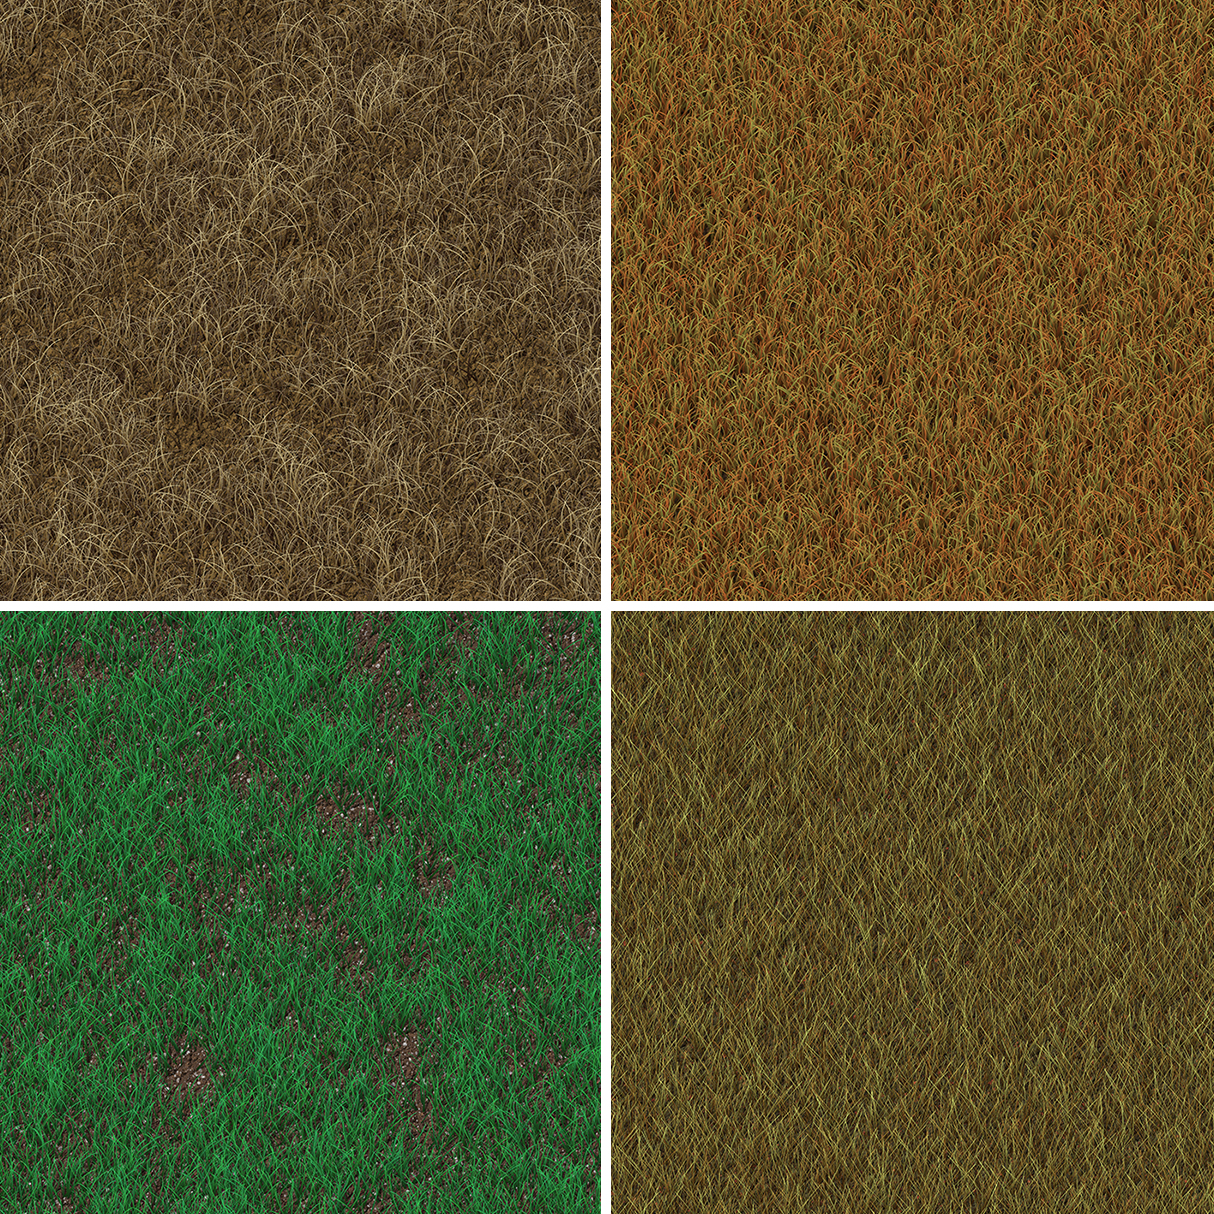 Grass Background Textures Square Samples Preview